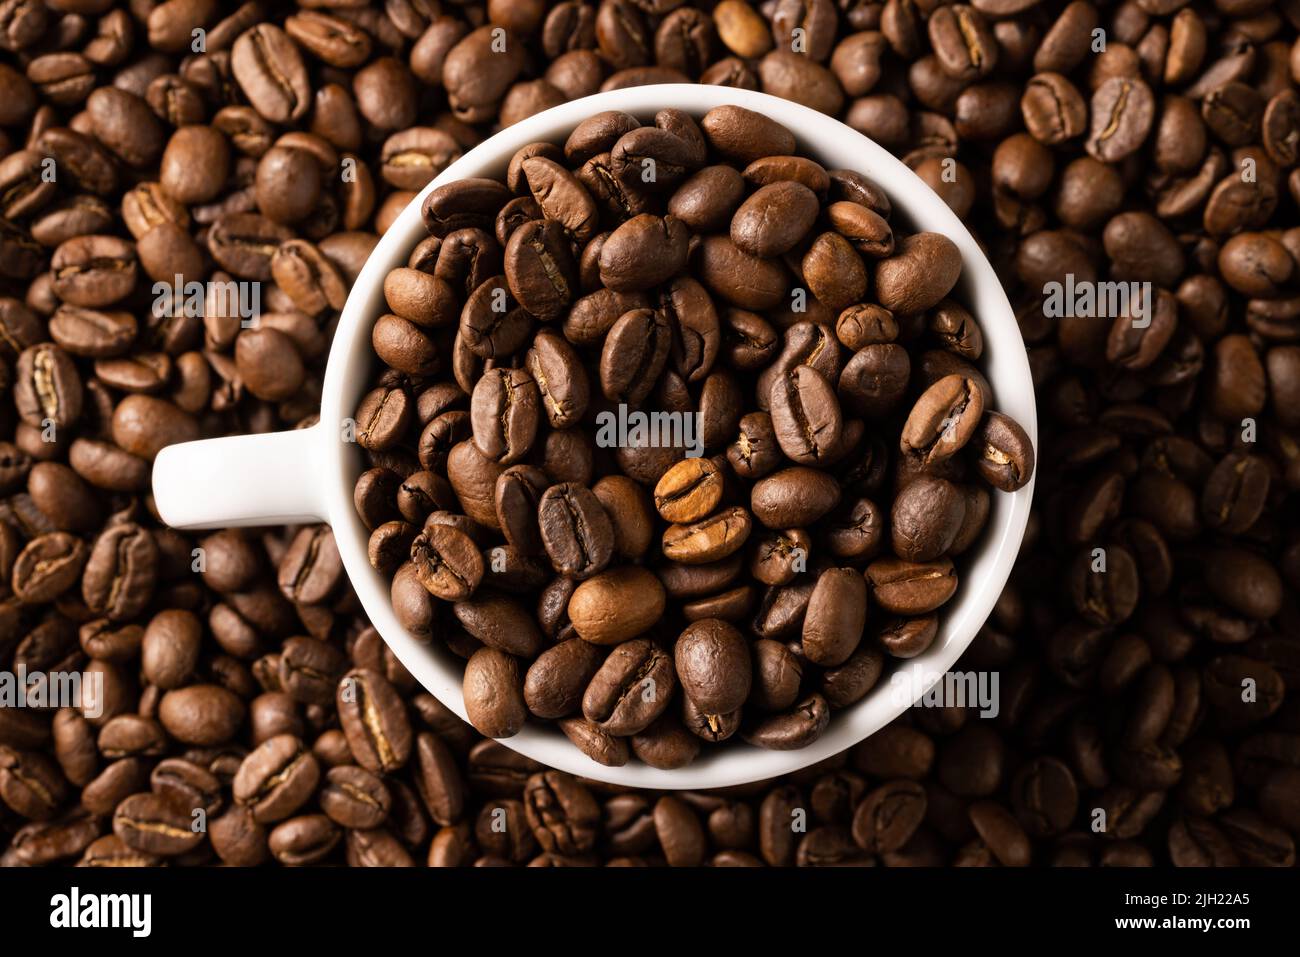 Image of white cup full of coffee beans on pile of coffee beans Stock Photo